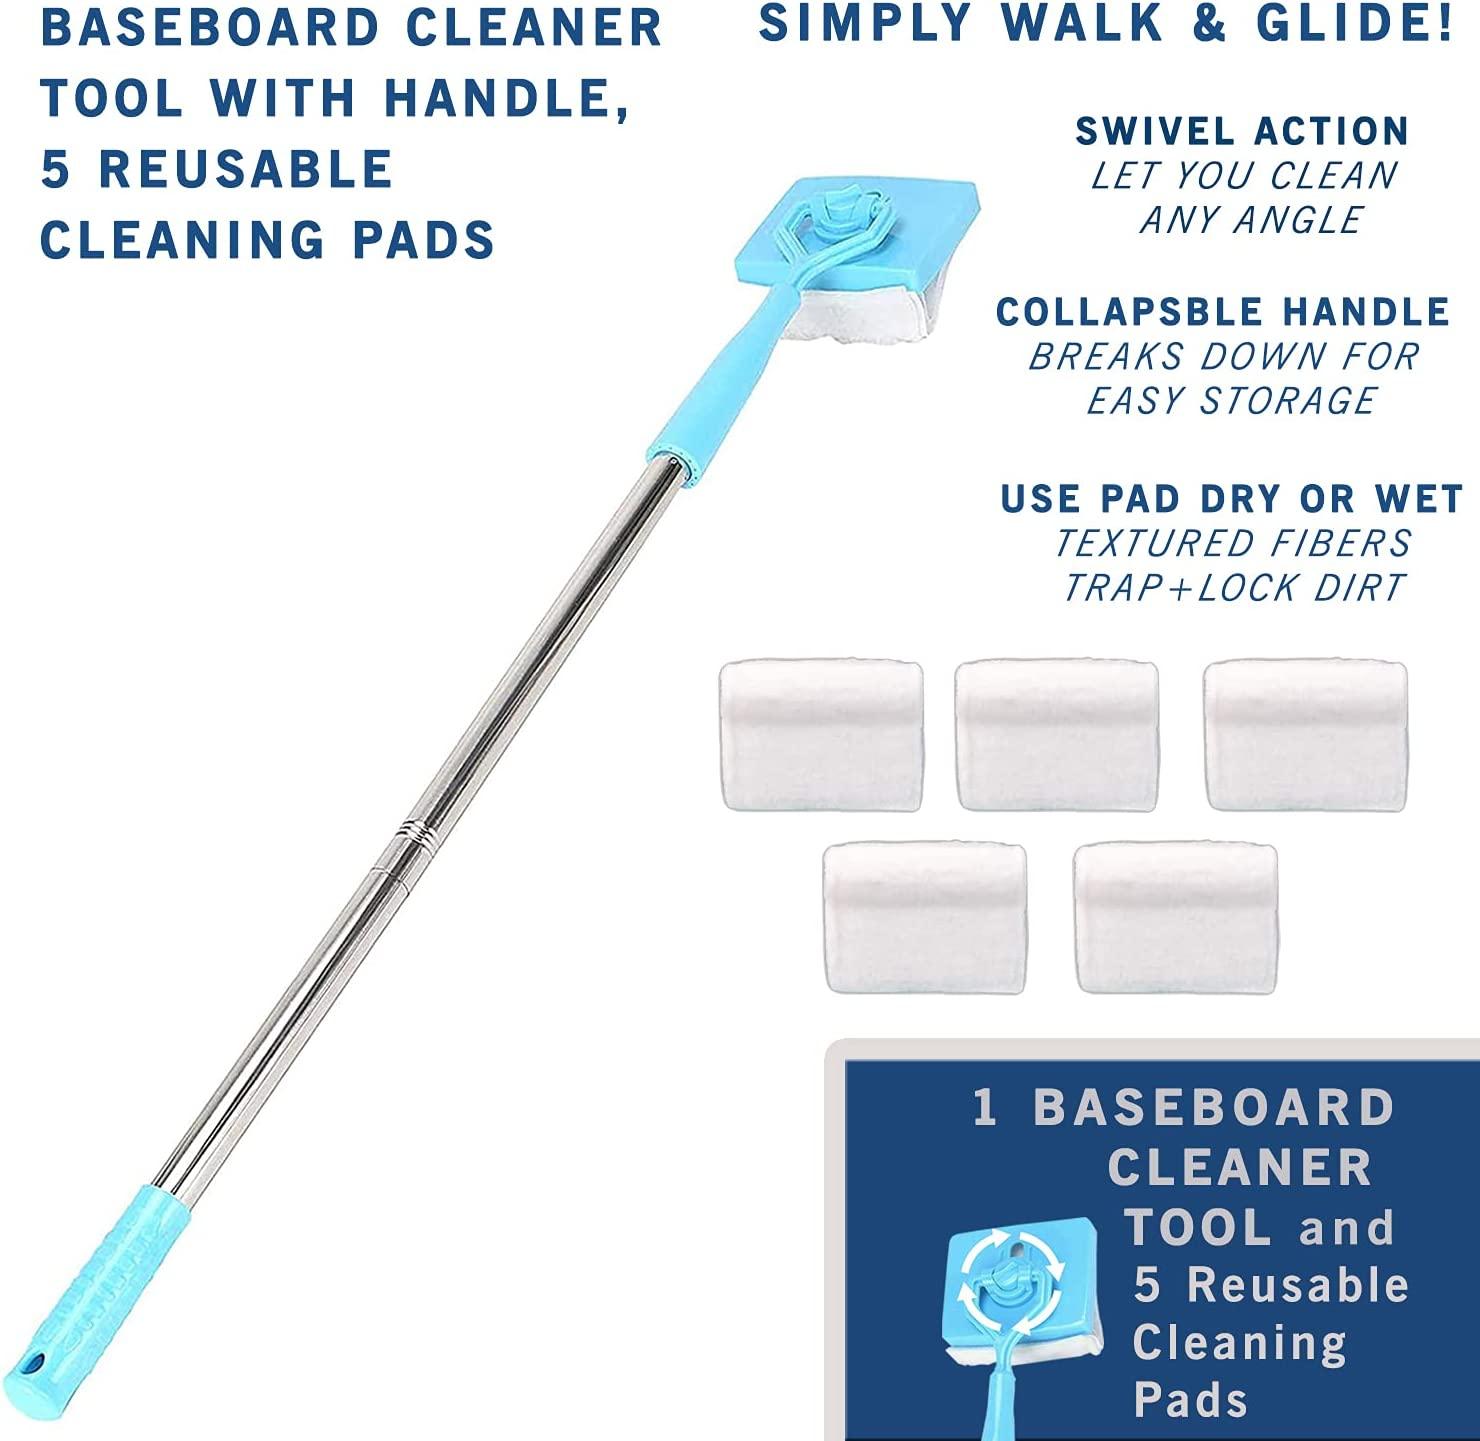 YUNWEI Baseboard Cleaner Tool with Handle 5 Reusable Cleaning Pads